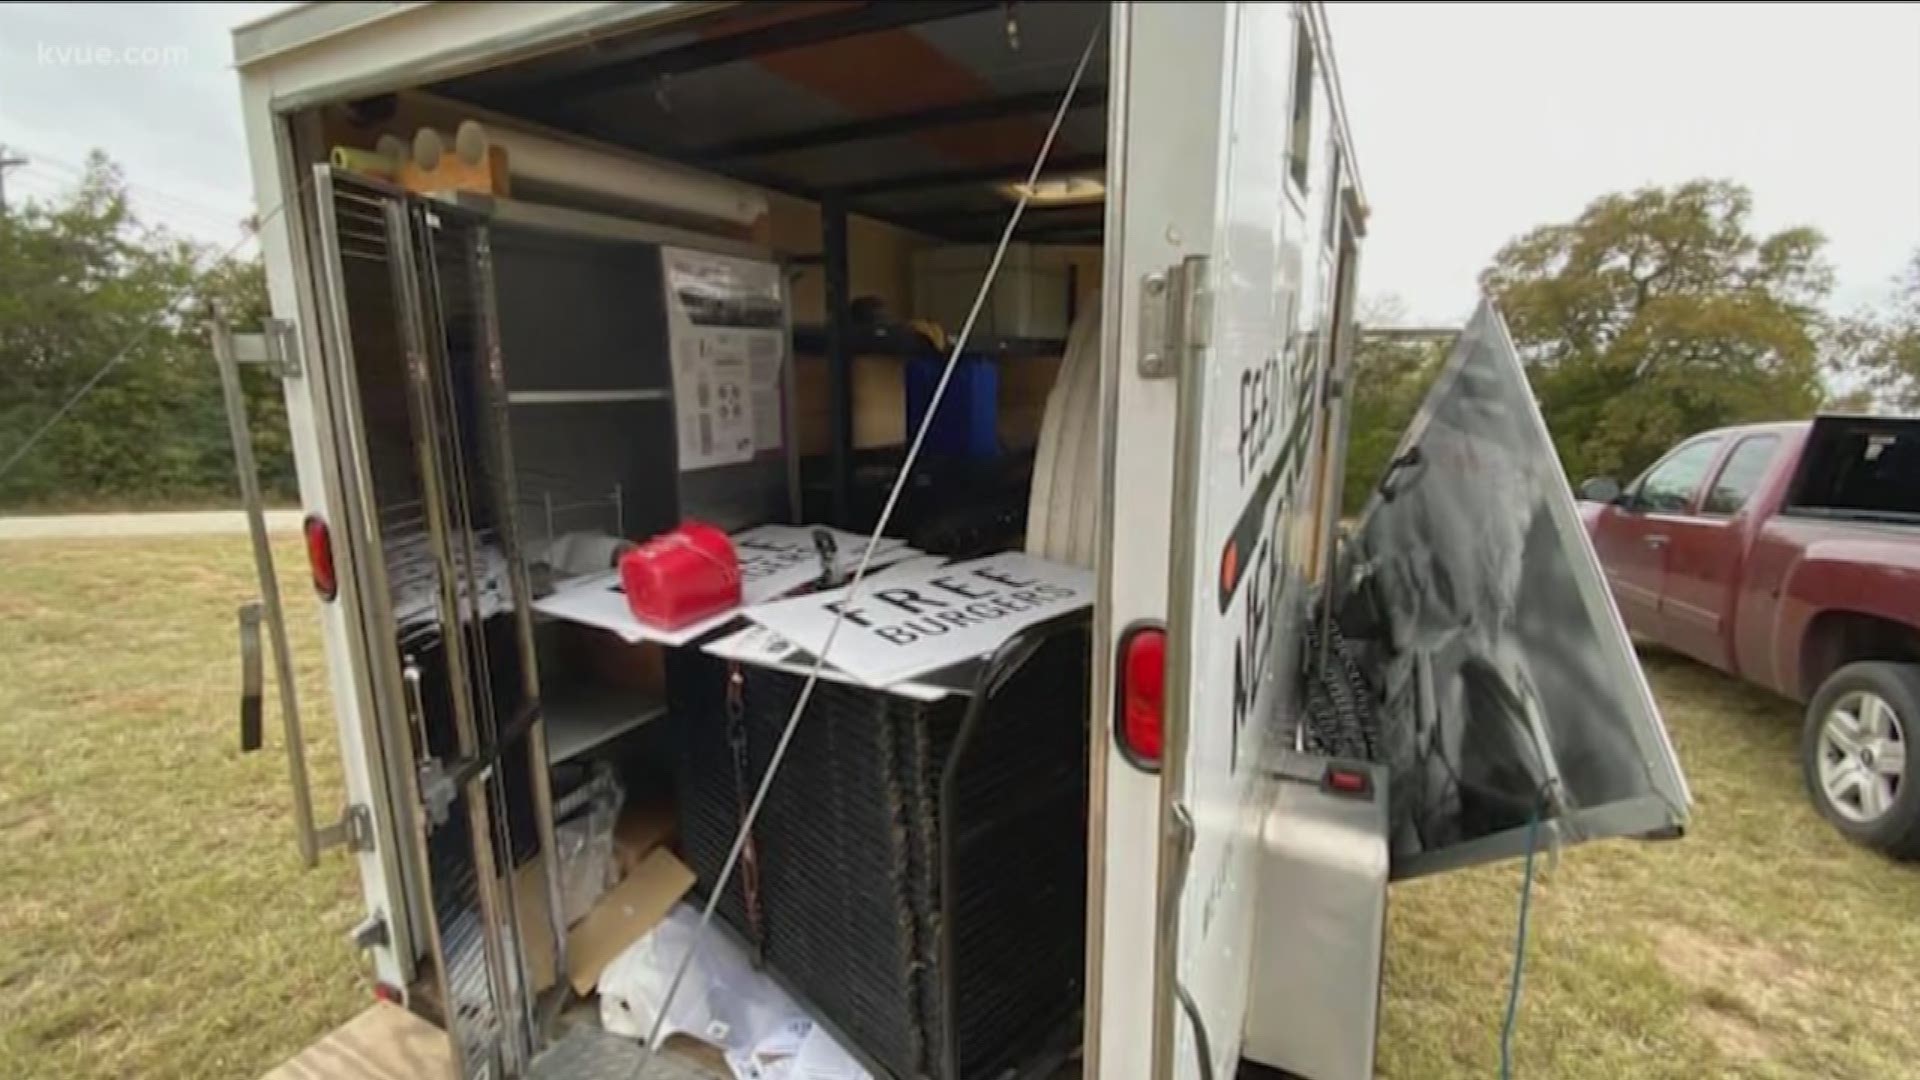 On Tuesday, someone stole their trailer and left it in a parking lot 20 miles outside of Bastrop after ransacking it.